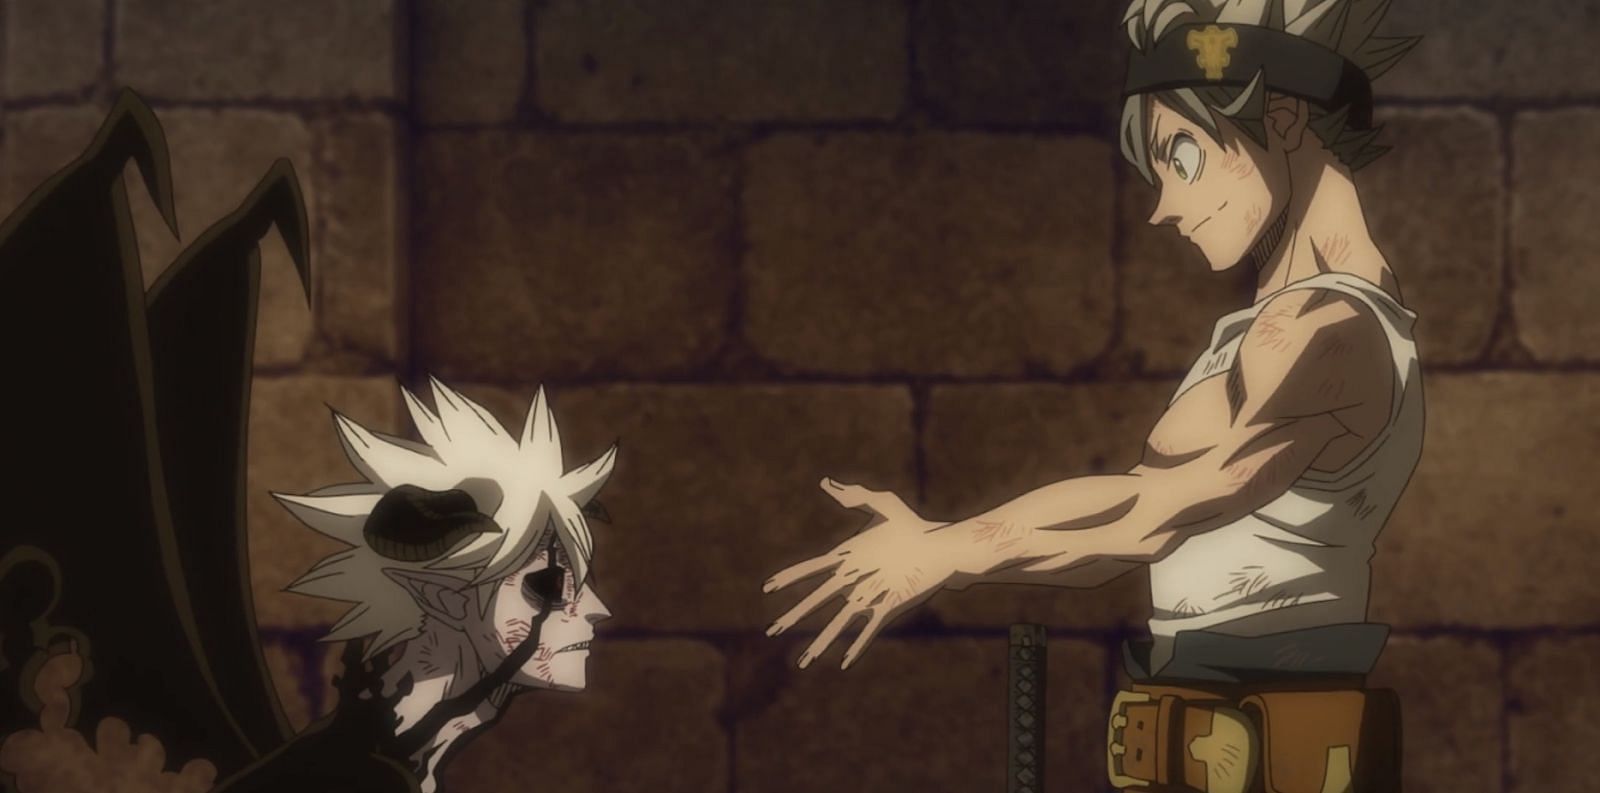 Black Clover Season 5 Everything You Need to Know